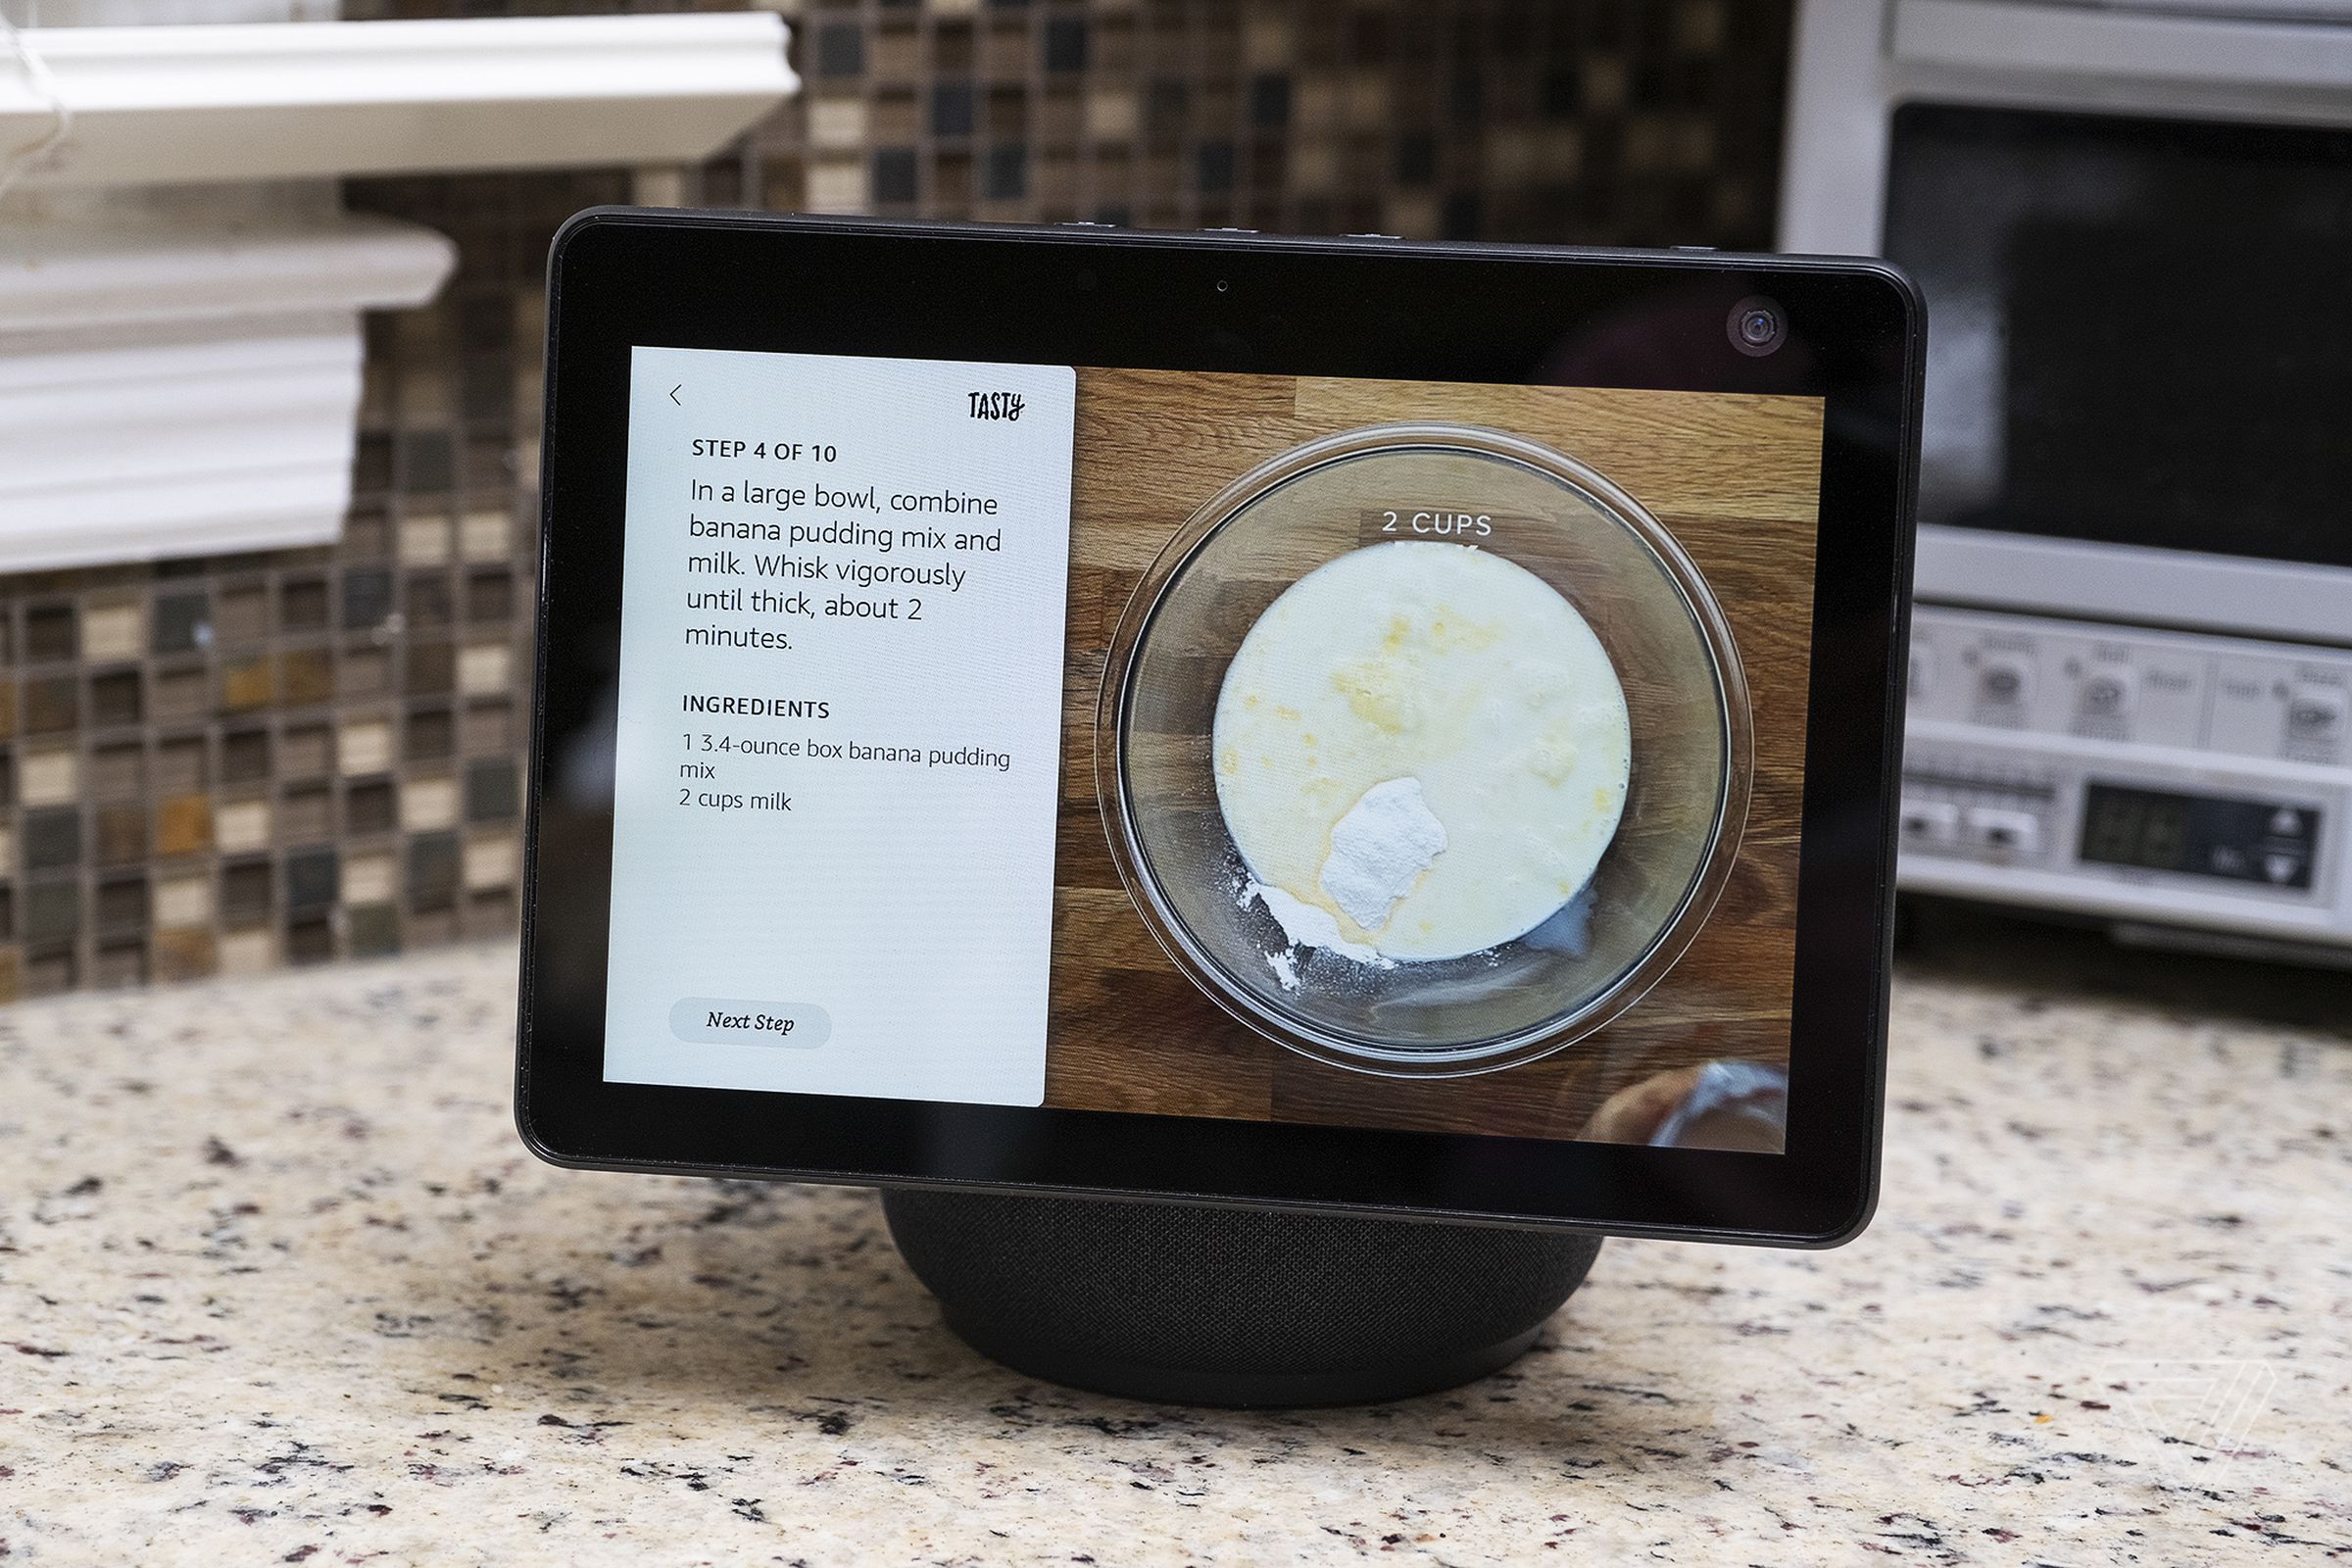 Amazon says the Show 10’s ability to move makes it easier to follow a recipe with it